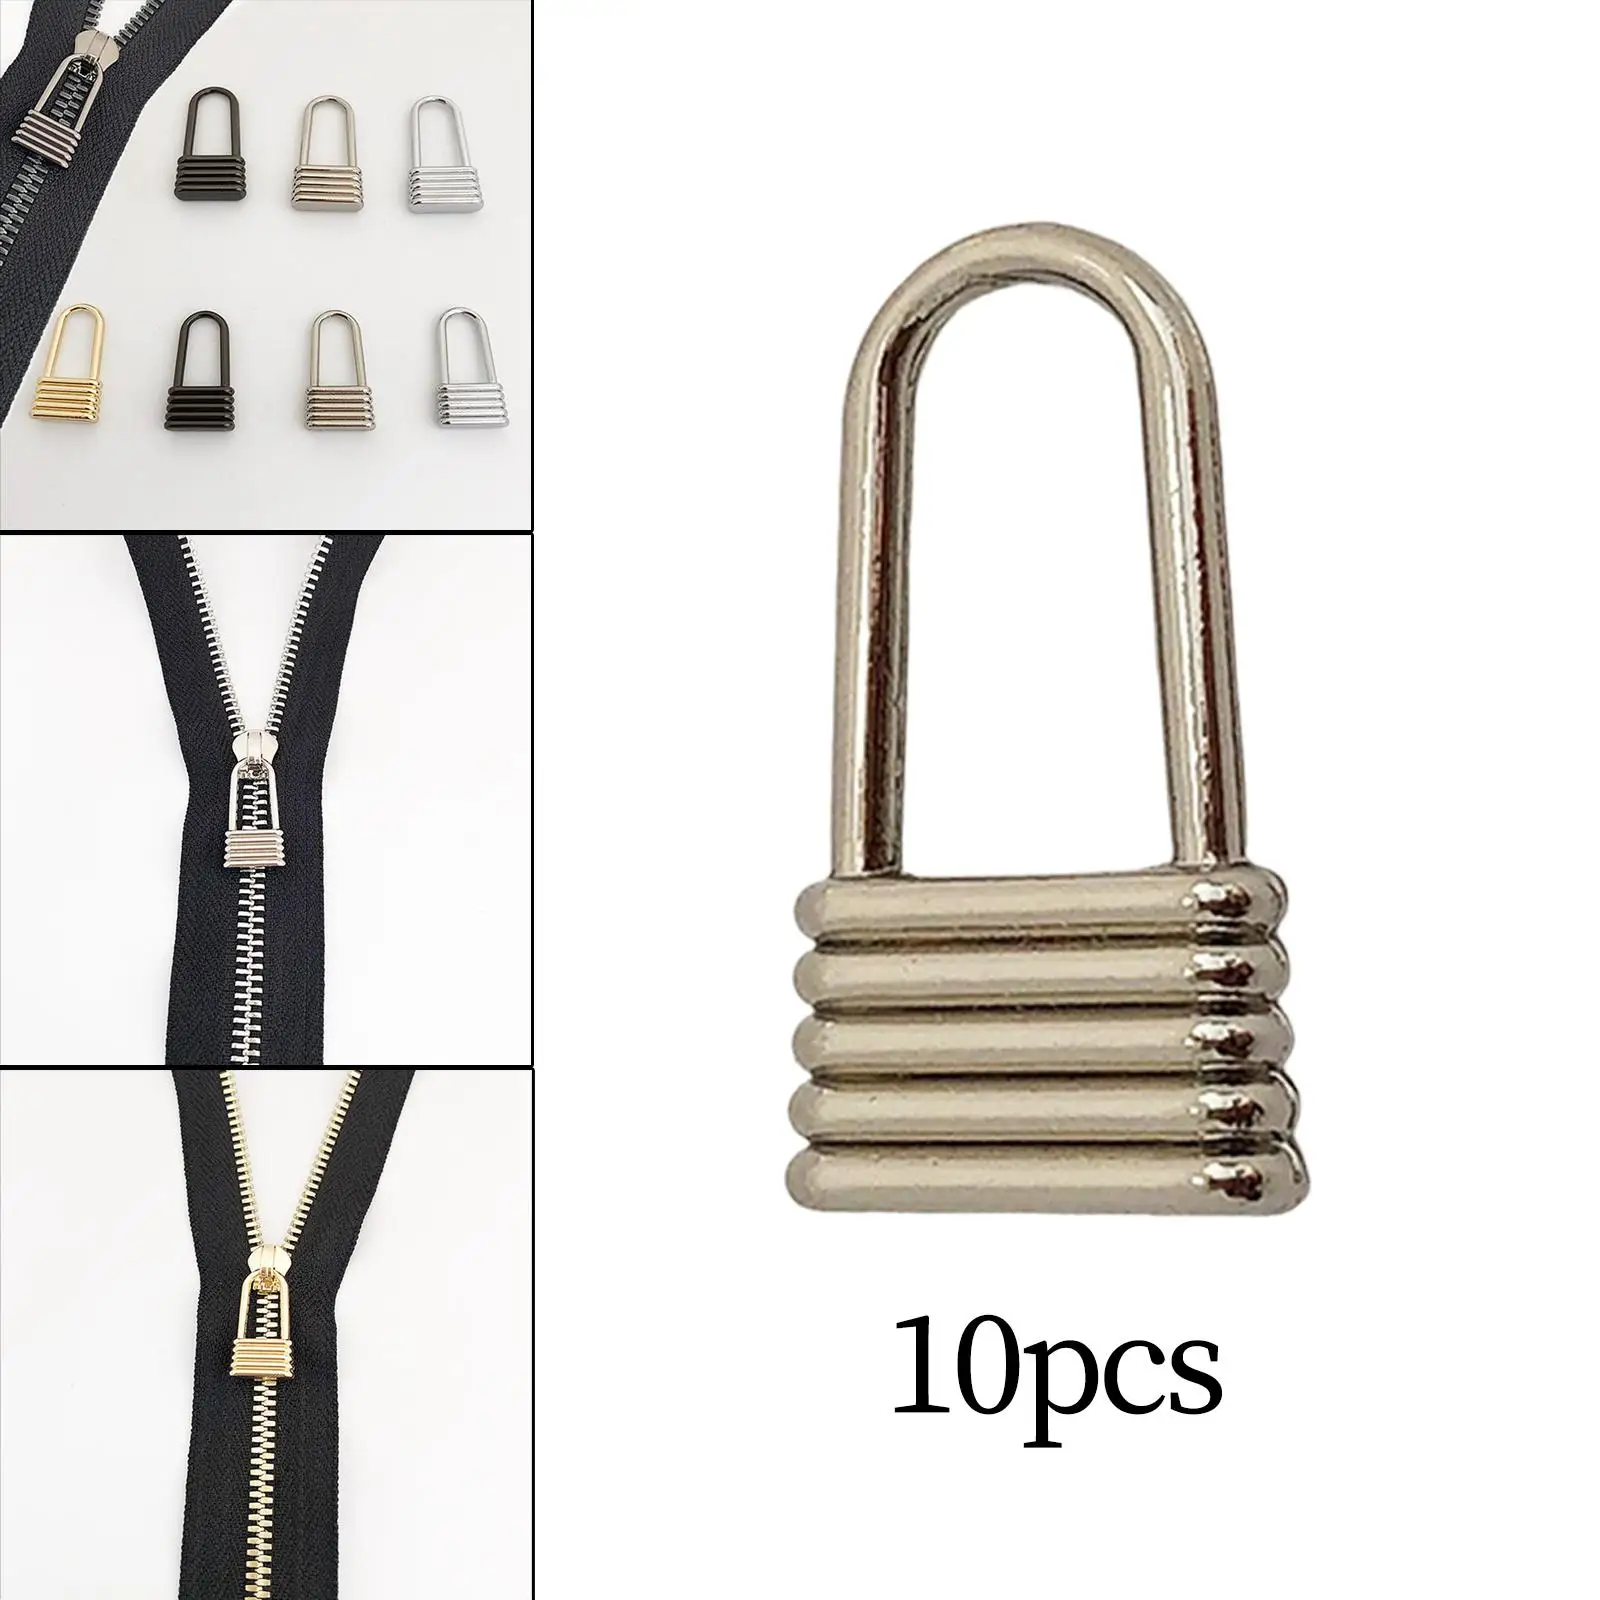 10Pcs Zinc Alloy Zipper Heads Pull Tab Zip Tags Replacement Sewing Mend Handle Zipper Pulls for Jacket Skirt Backpack Bags Coat